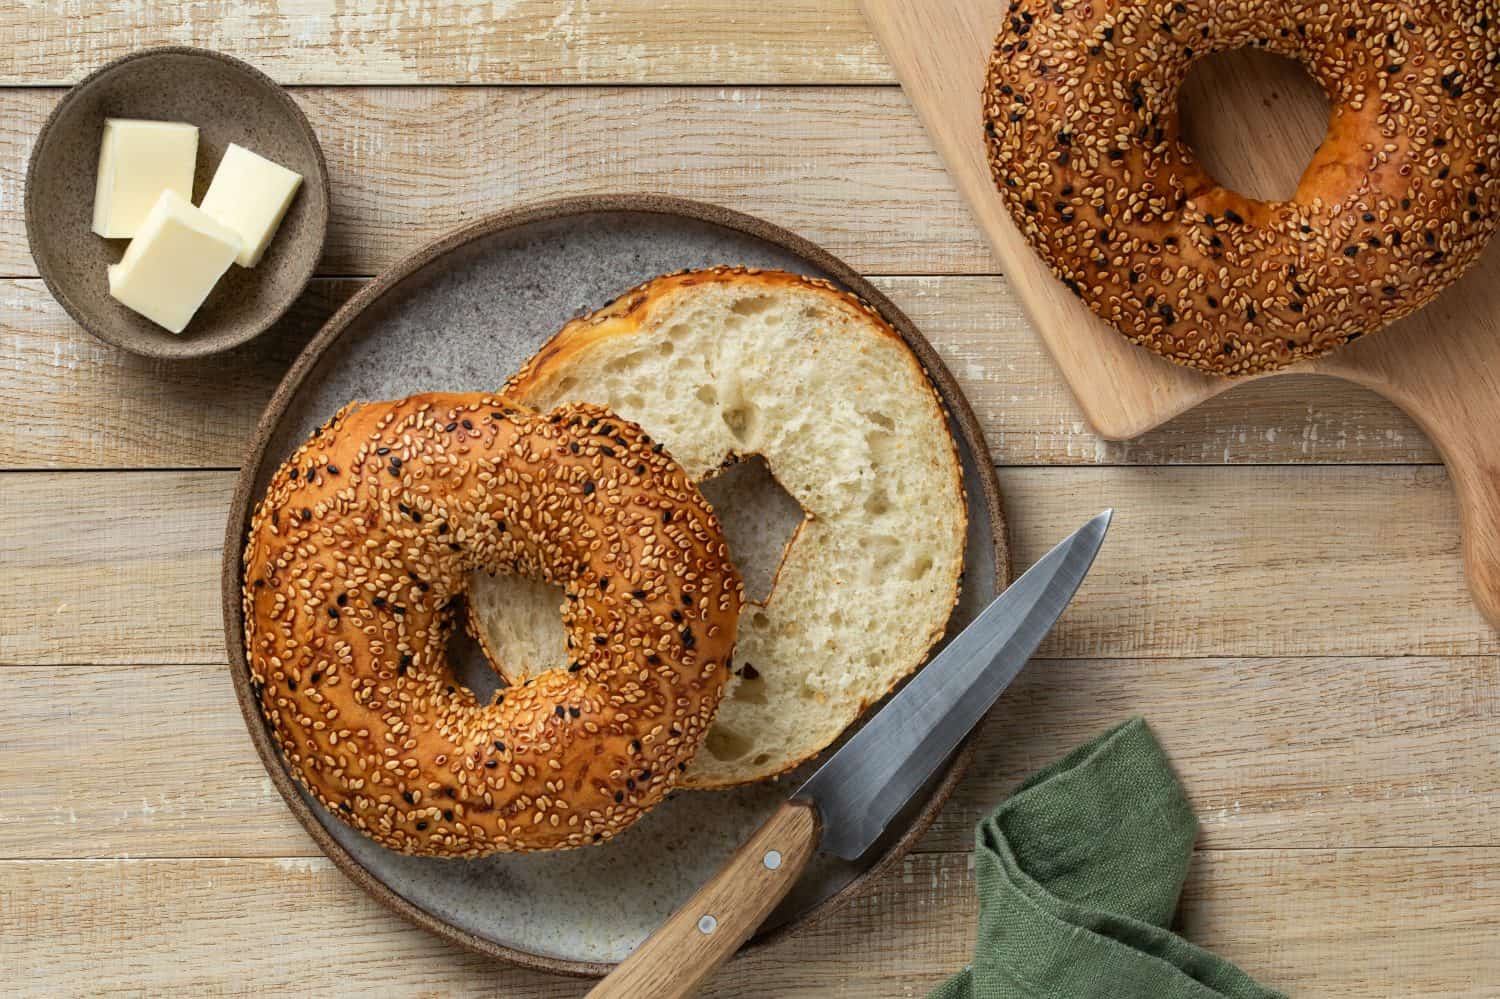 freshly baked bagel, healthy breakfast concept, top view, wooden background, toned